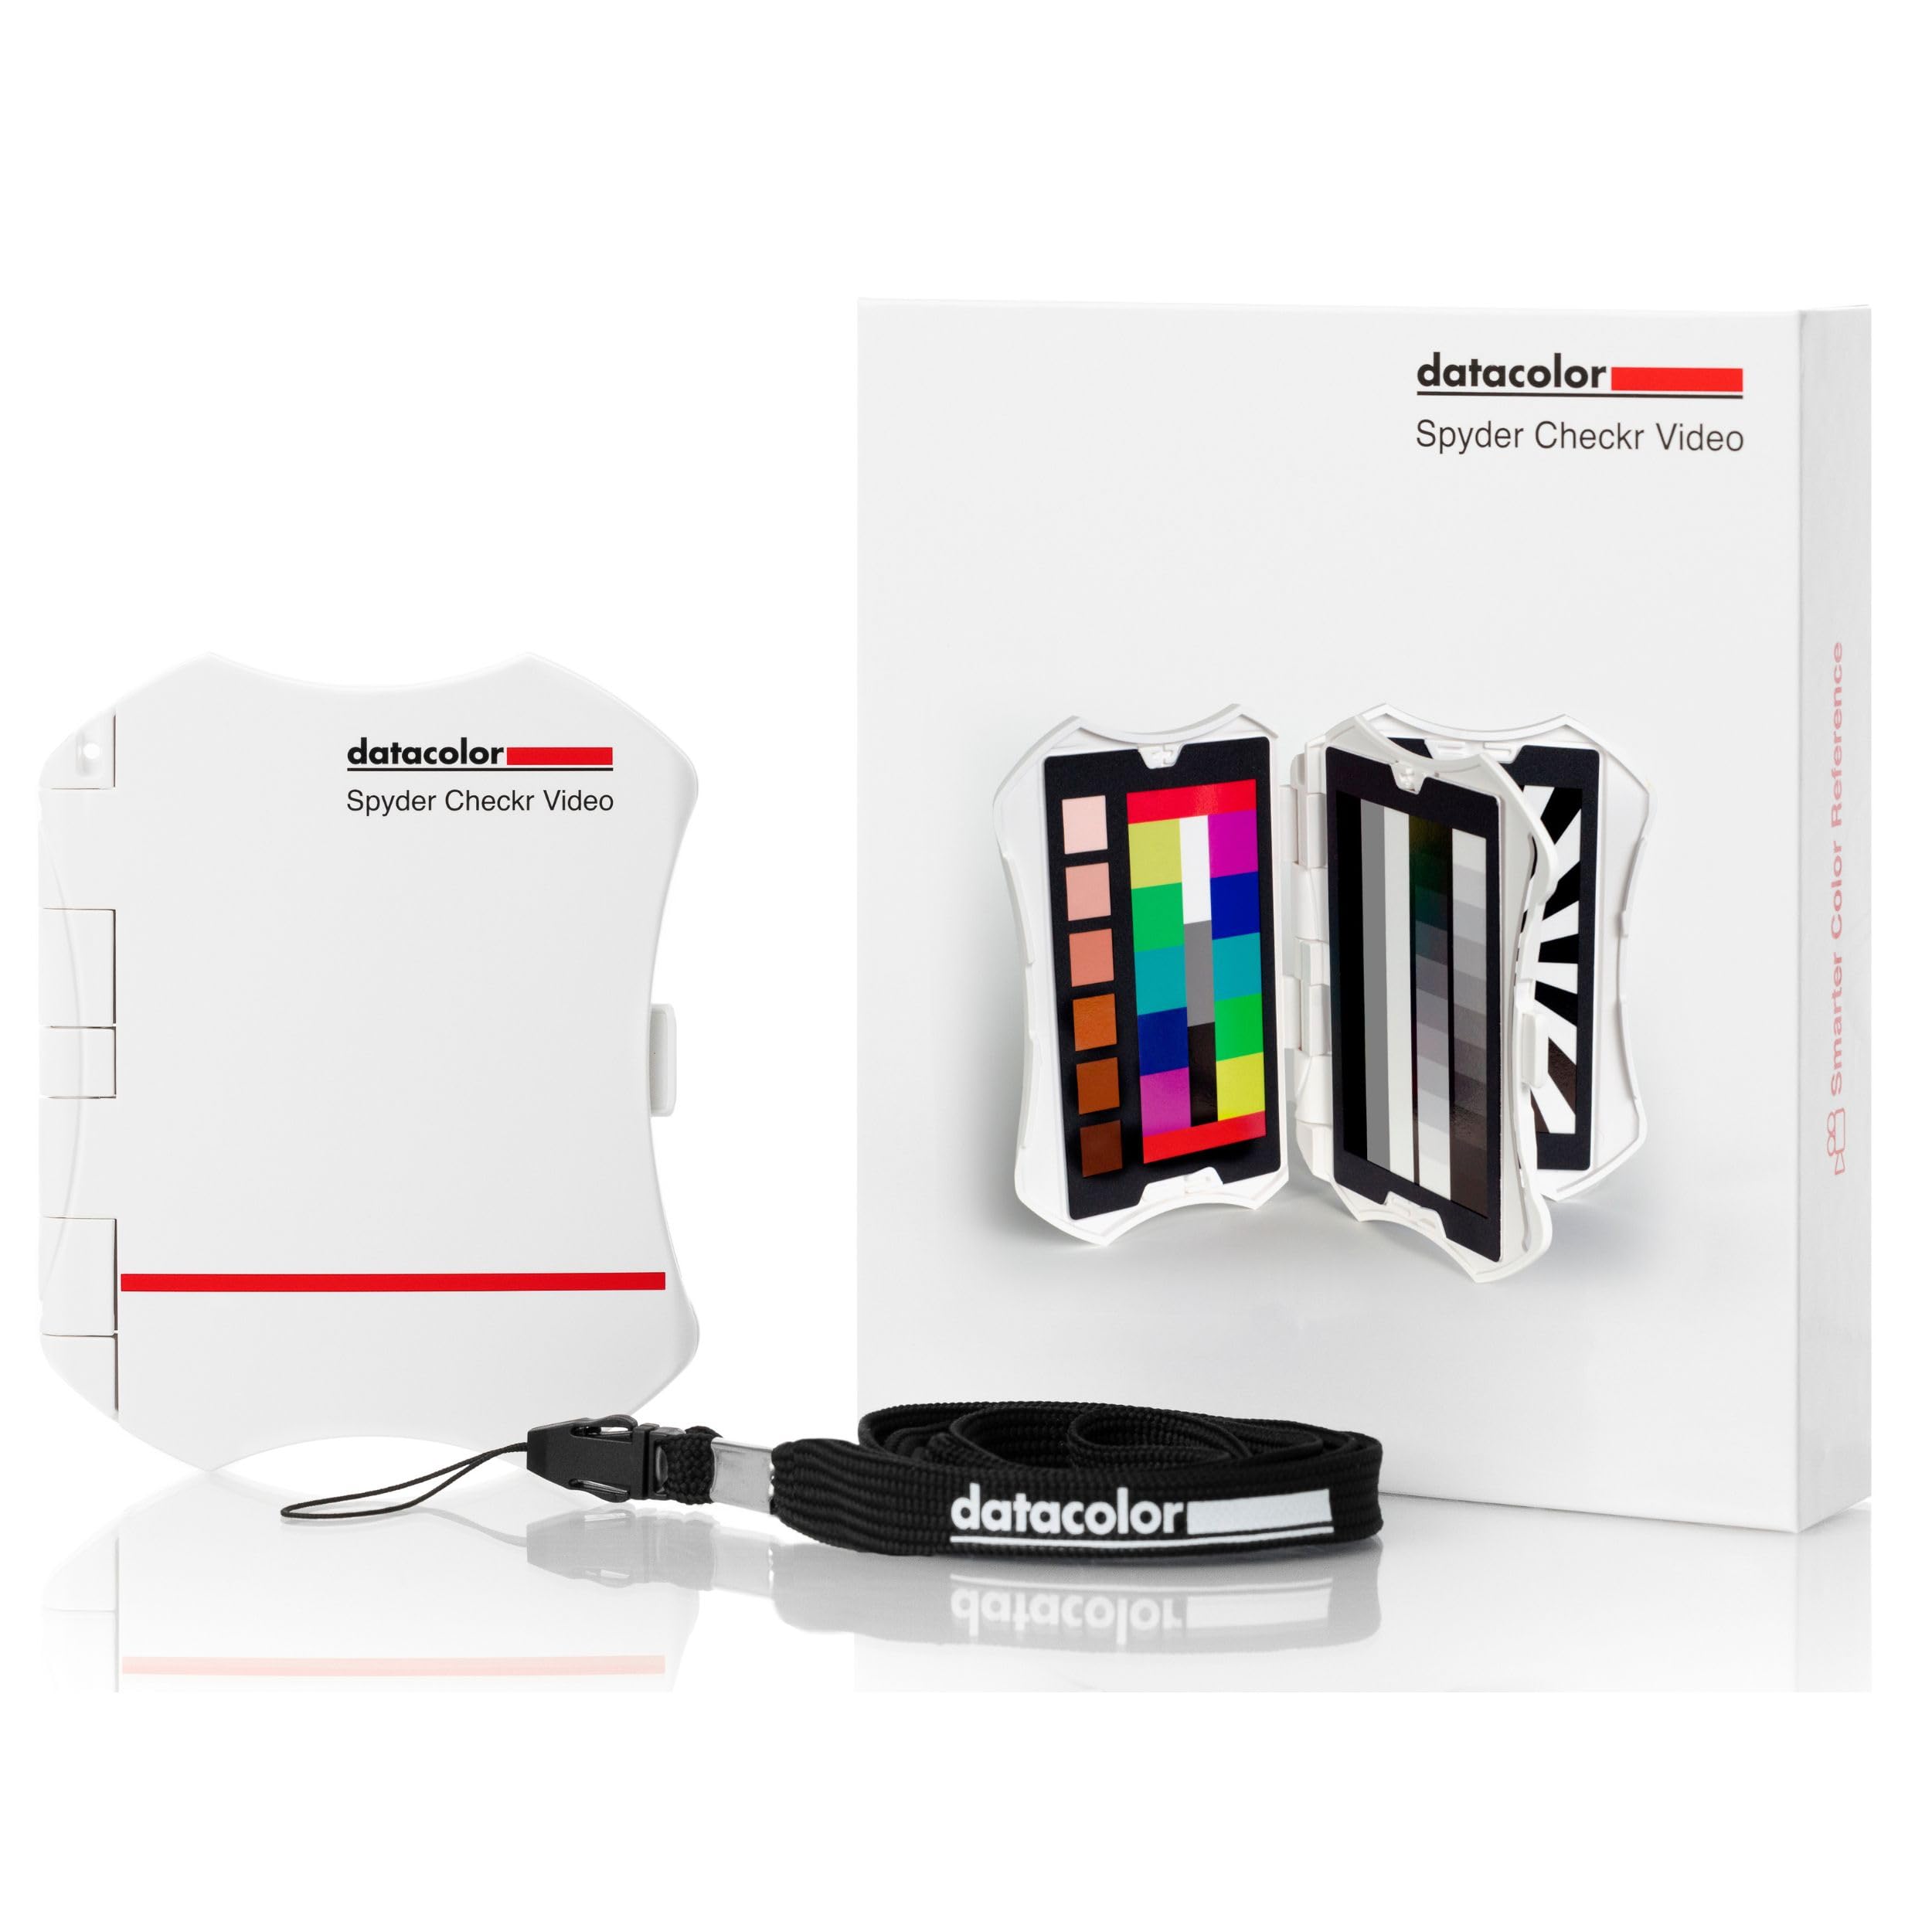 Datacolor Spyder Checkr Video – Video Color Tool with Patent-Pending Color Pattern Card That leverages How Video is Processed, for More Color Information at-a-Glance for Precise Color & Exposure.